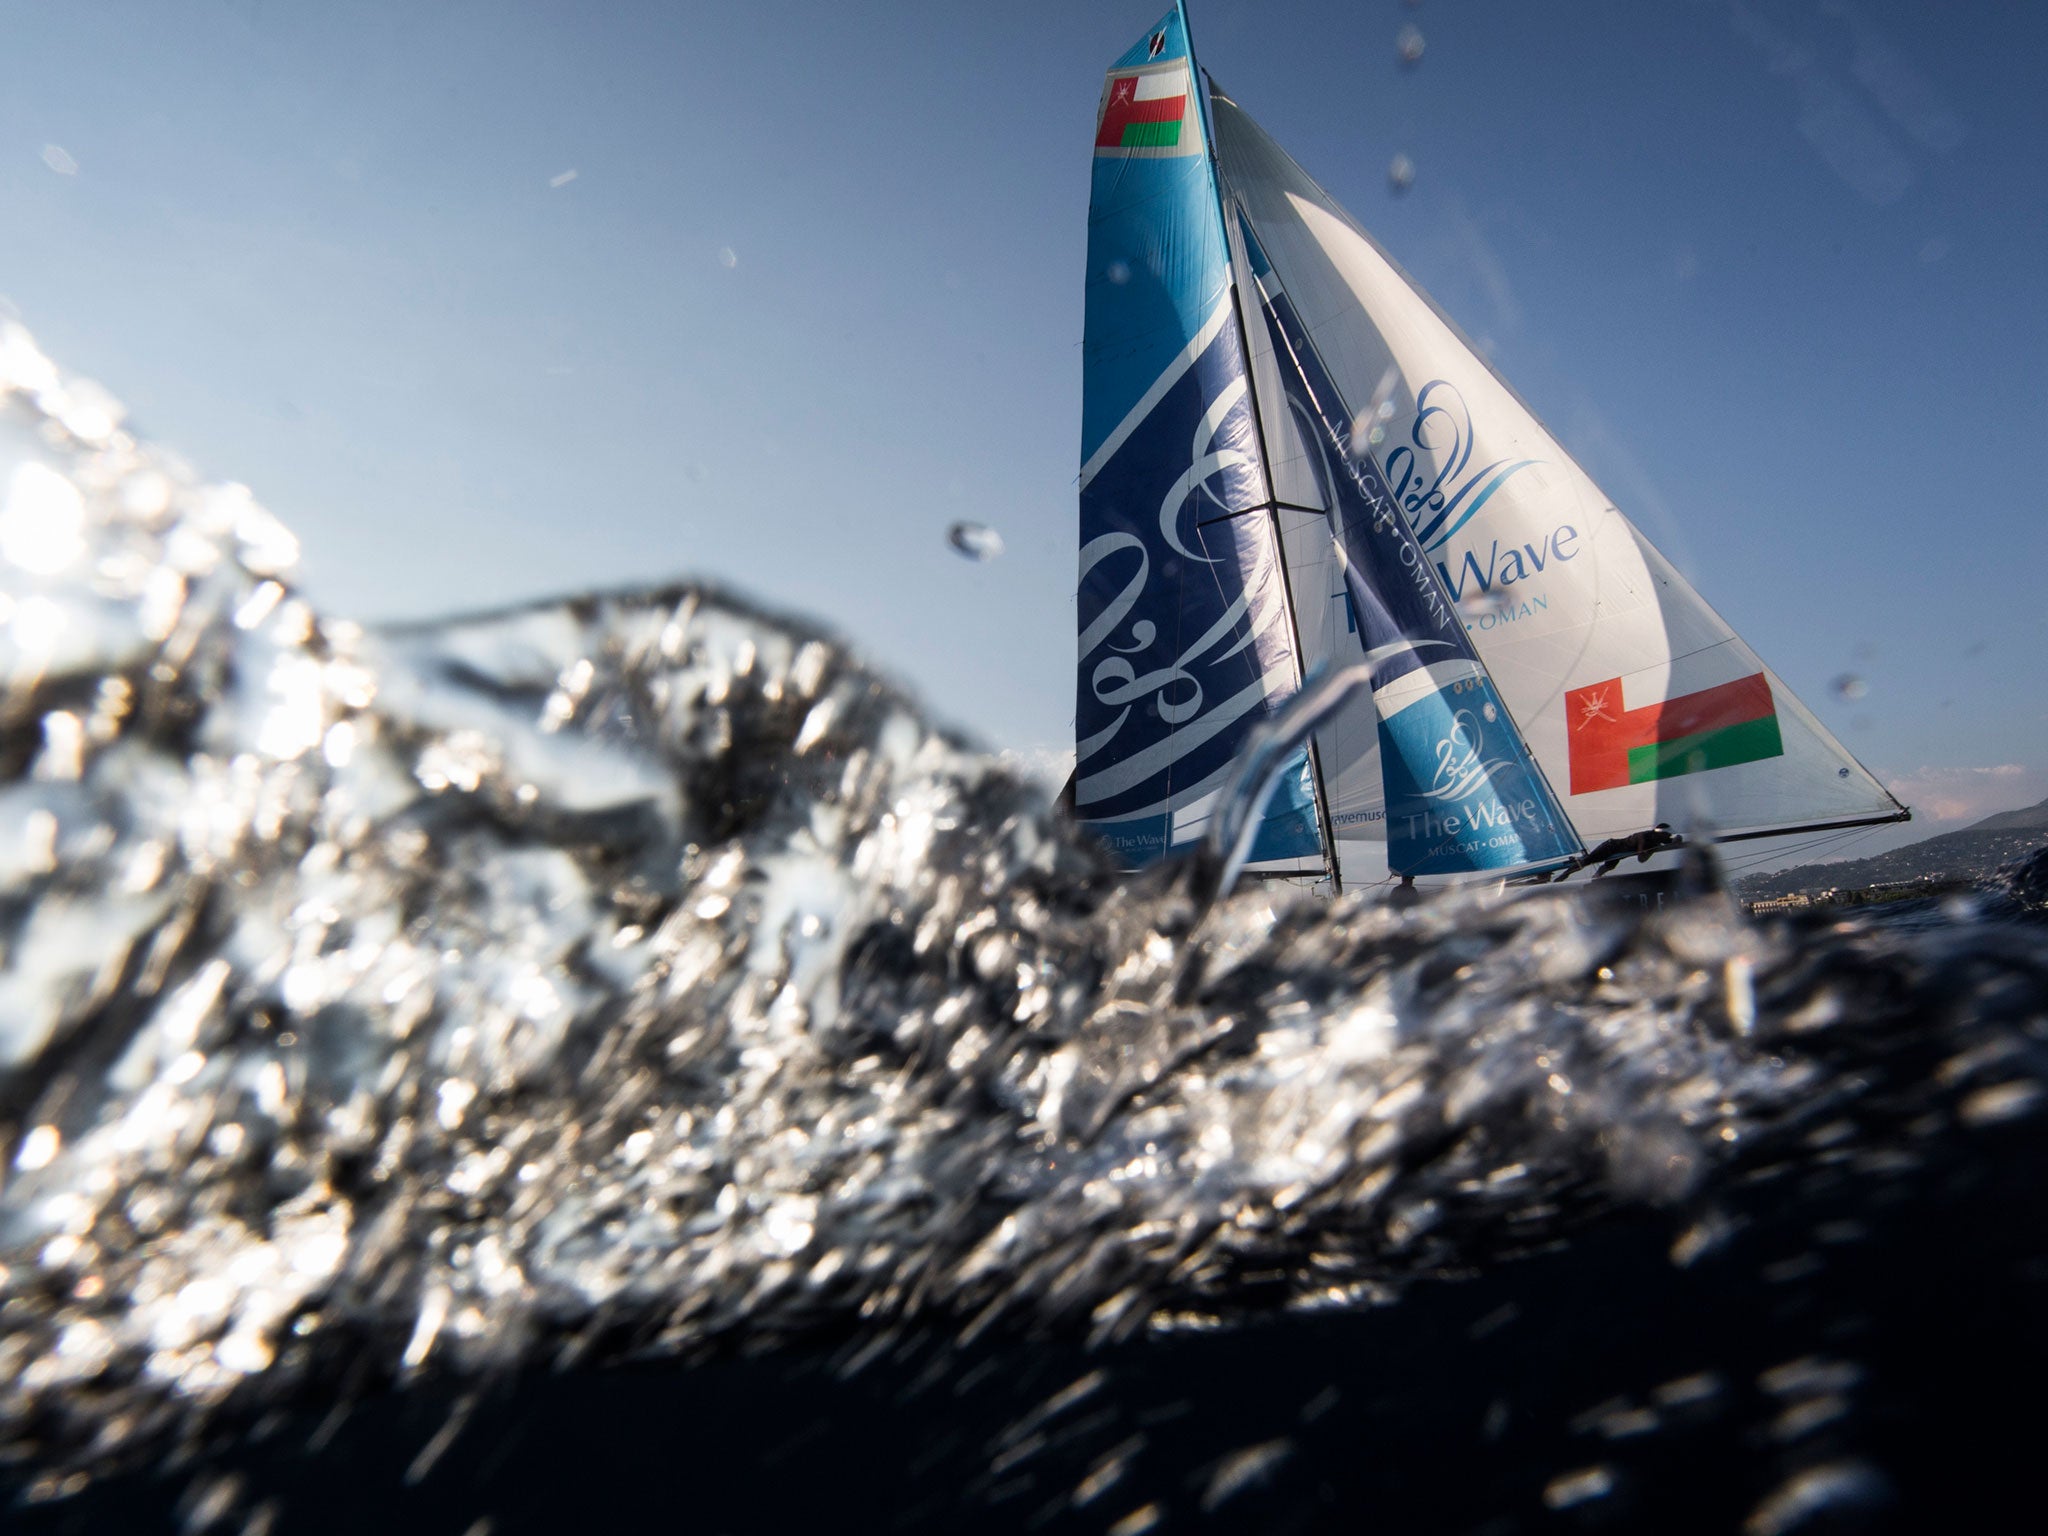 Defending Extreme Sailing Series champion Leigh McMillan and his The Wave, Muscat crew are still in touch but needing to recover strongly in the final two days of the Nice regatta.